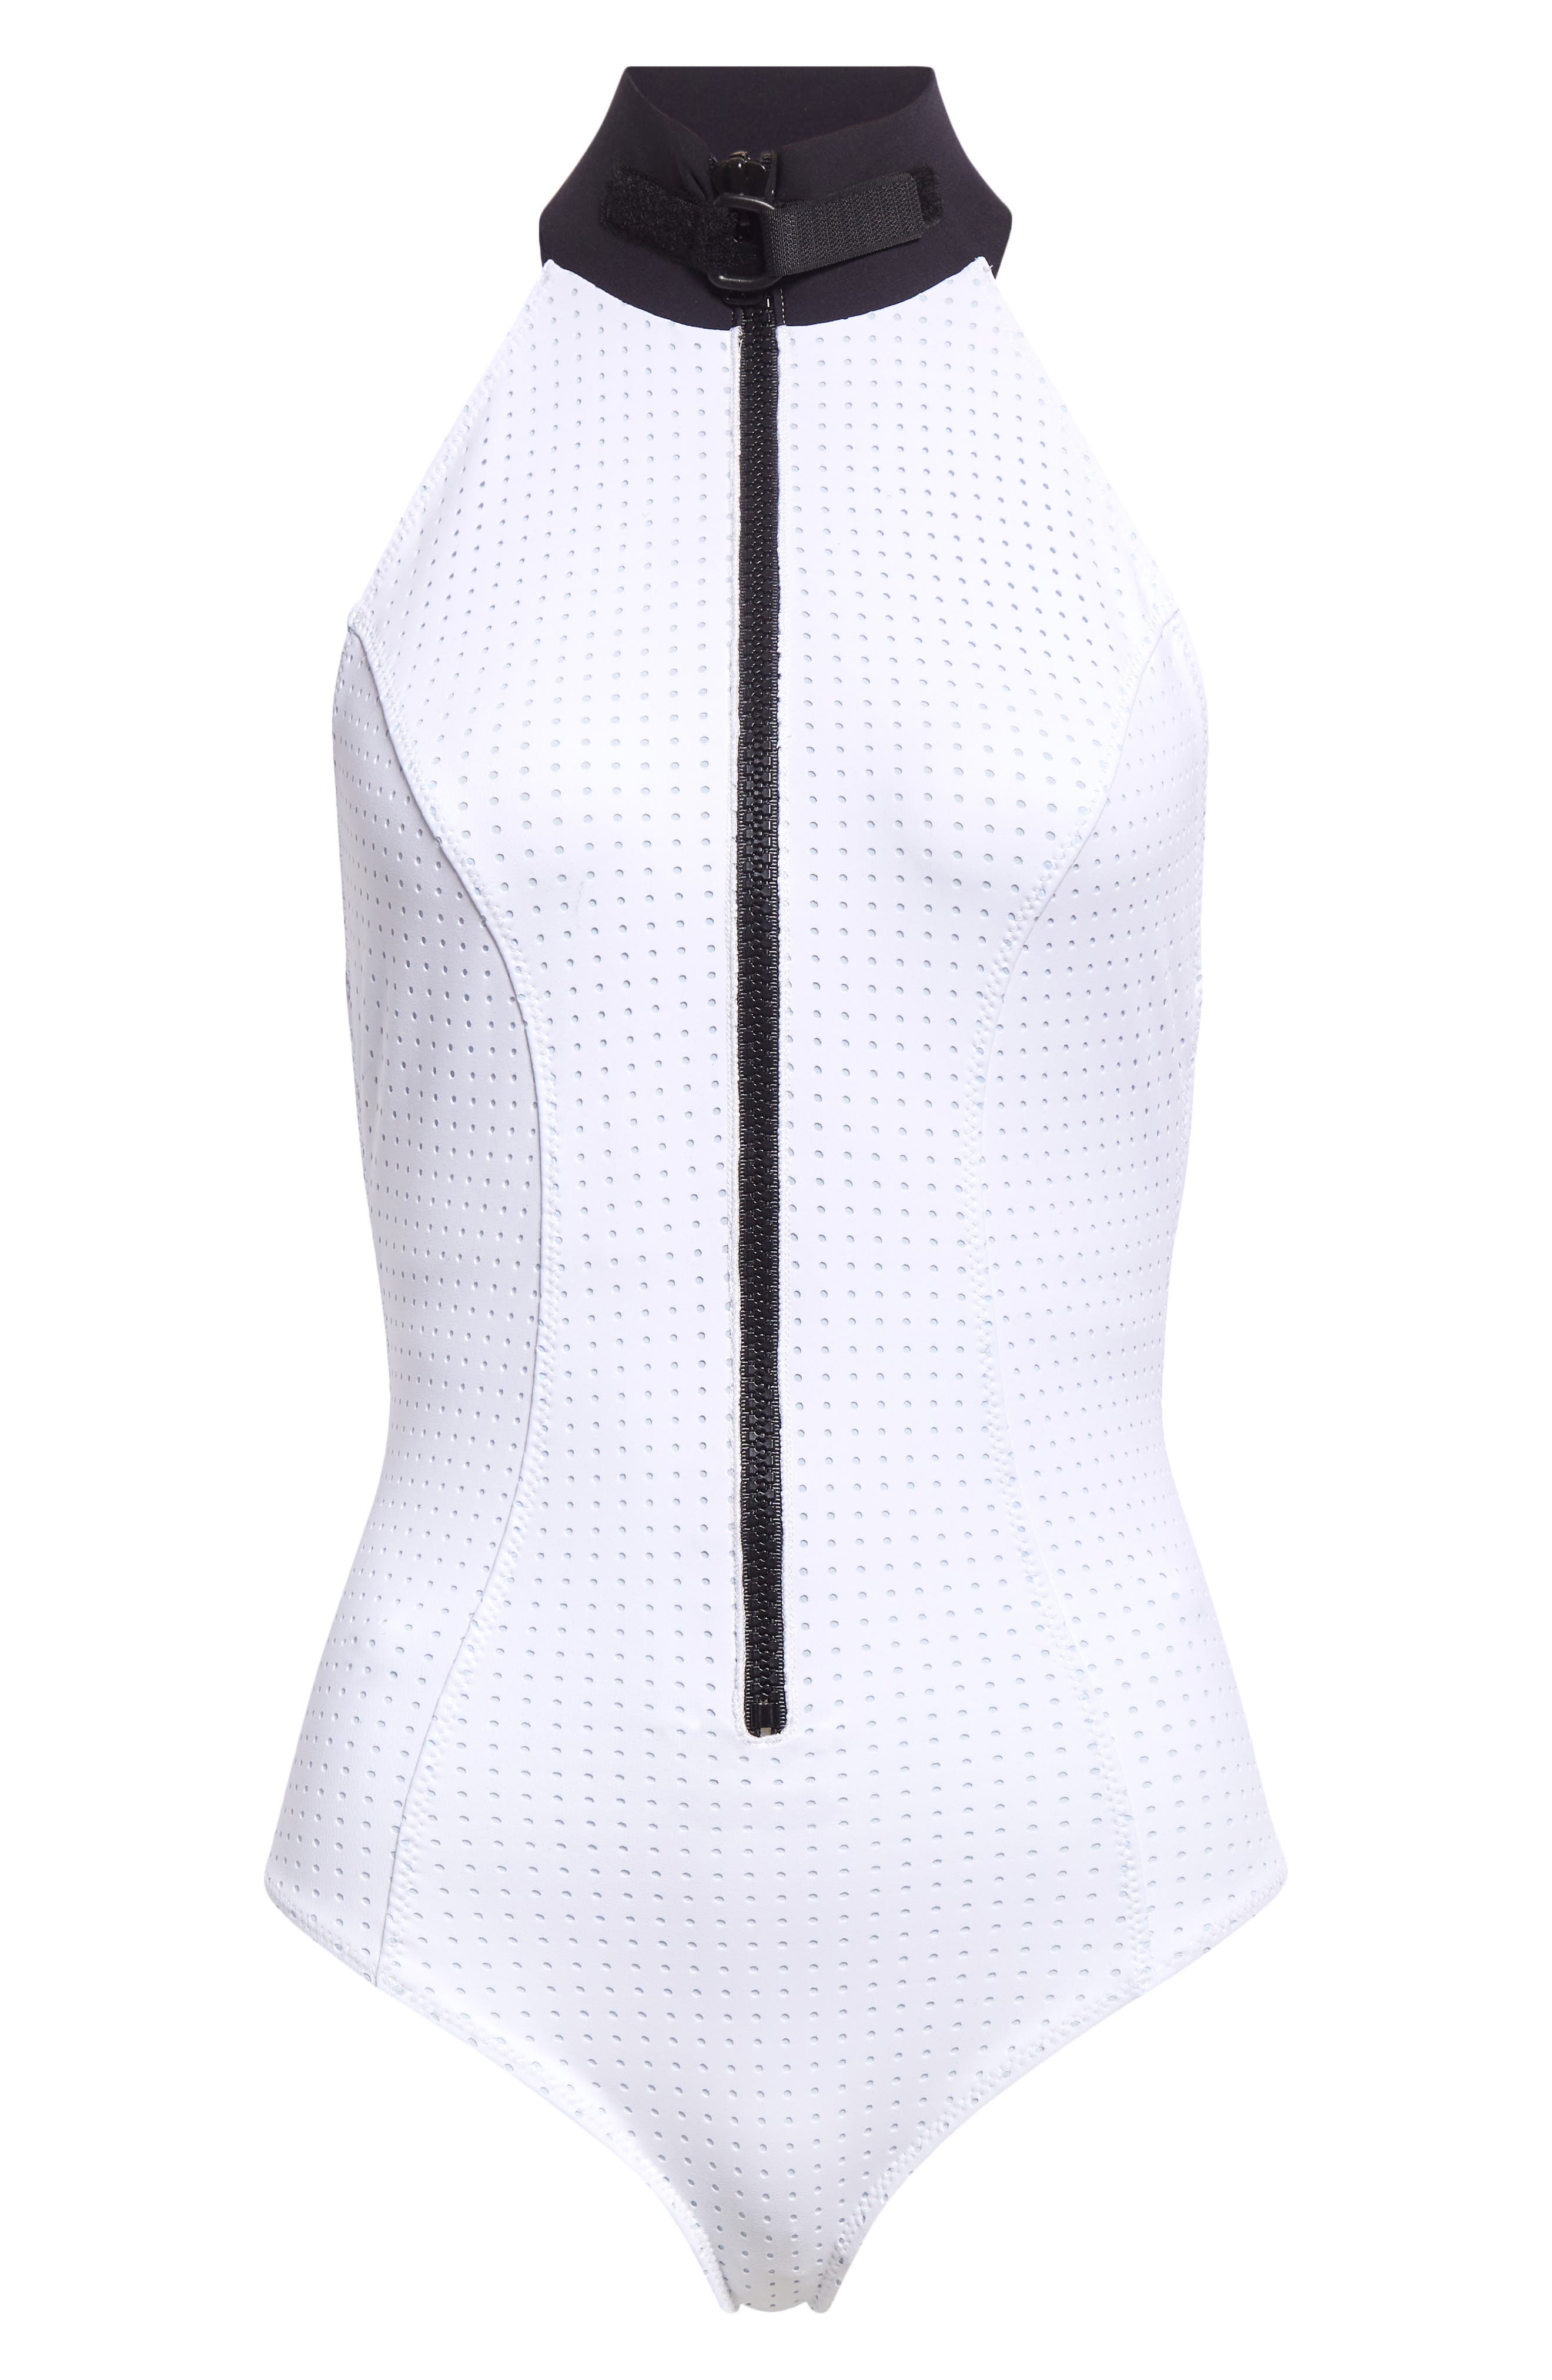 THE CORSET MAILLOT in WHITE & PALE BLUE PERFORATED BONDED – Lisa